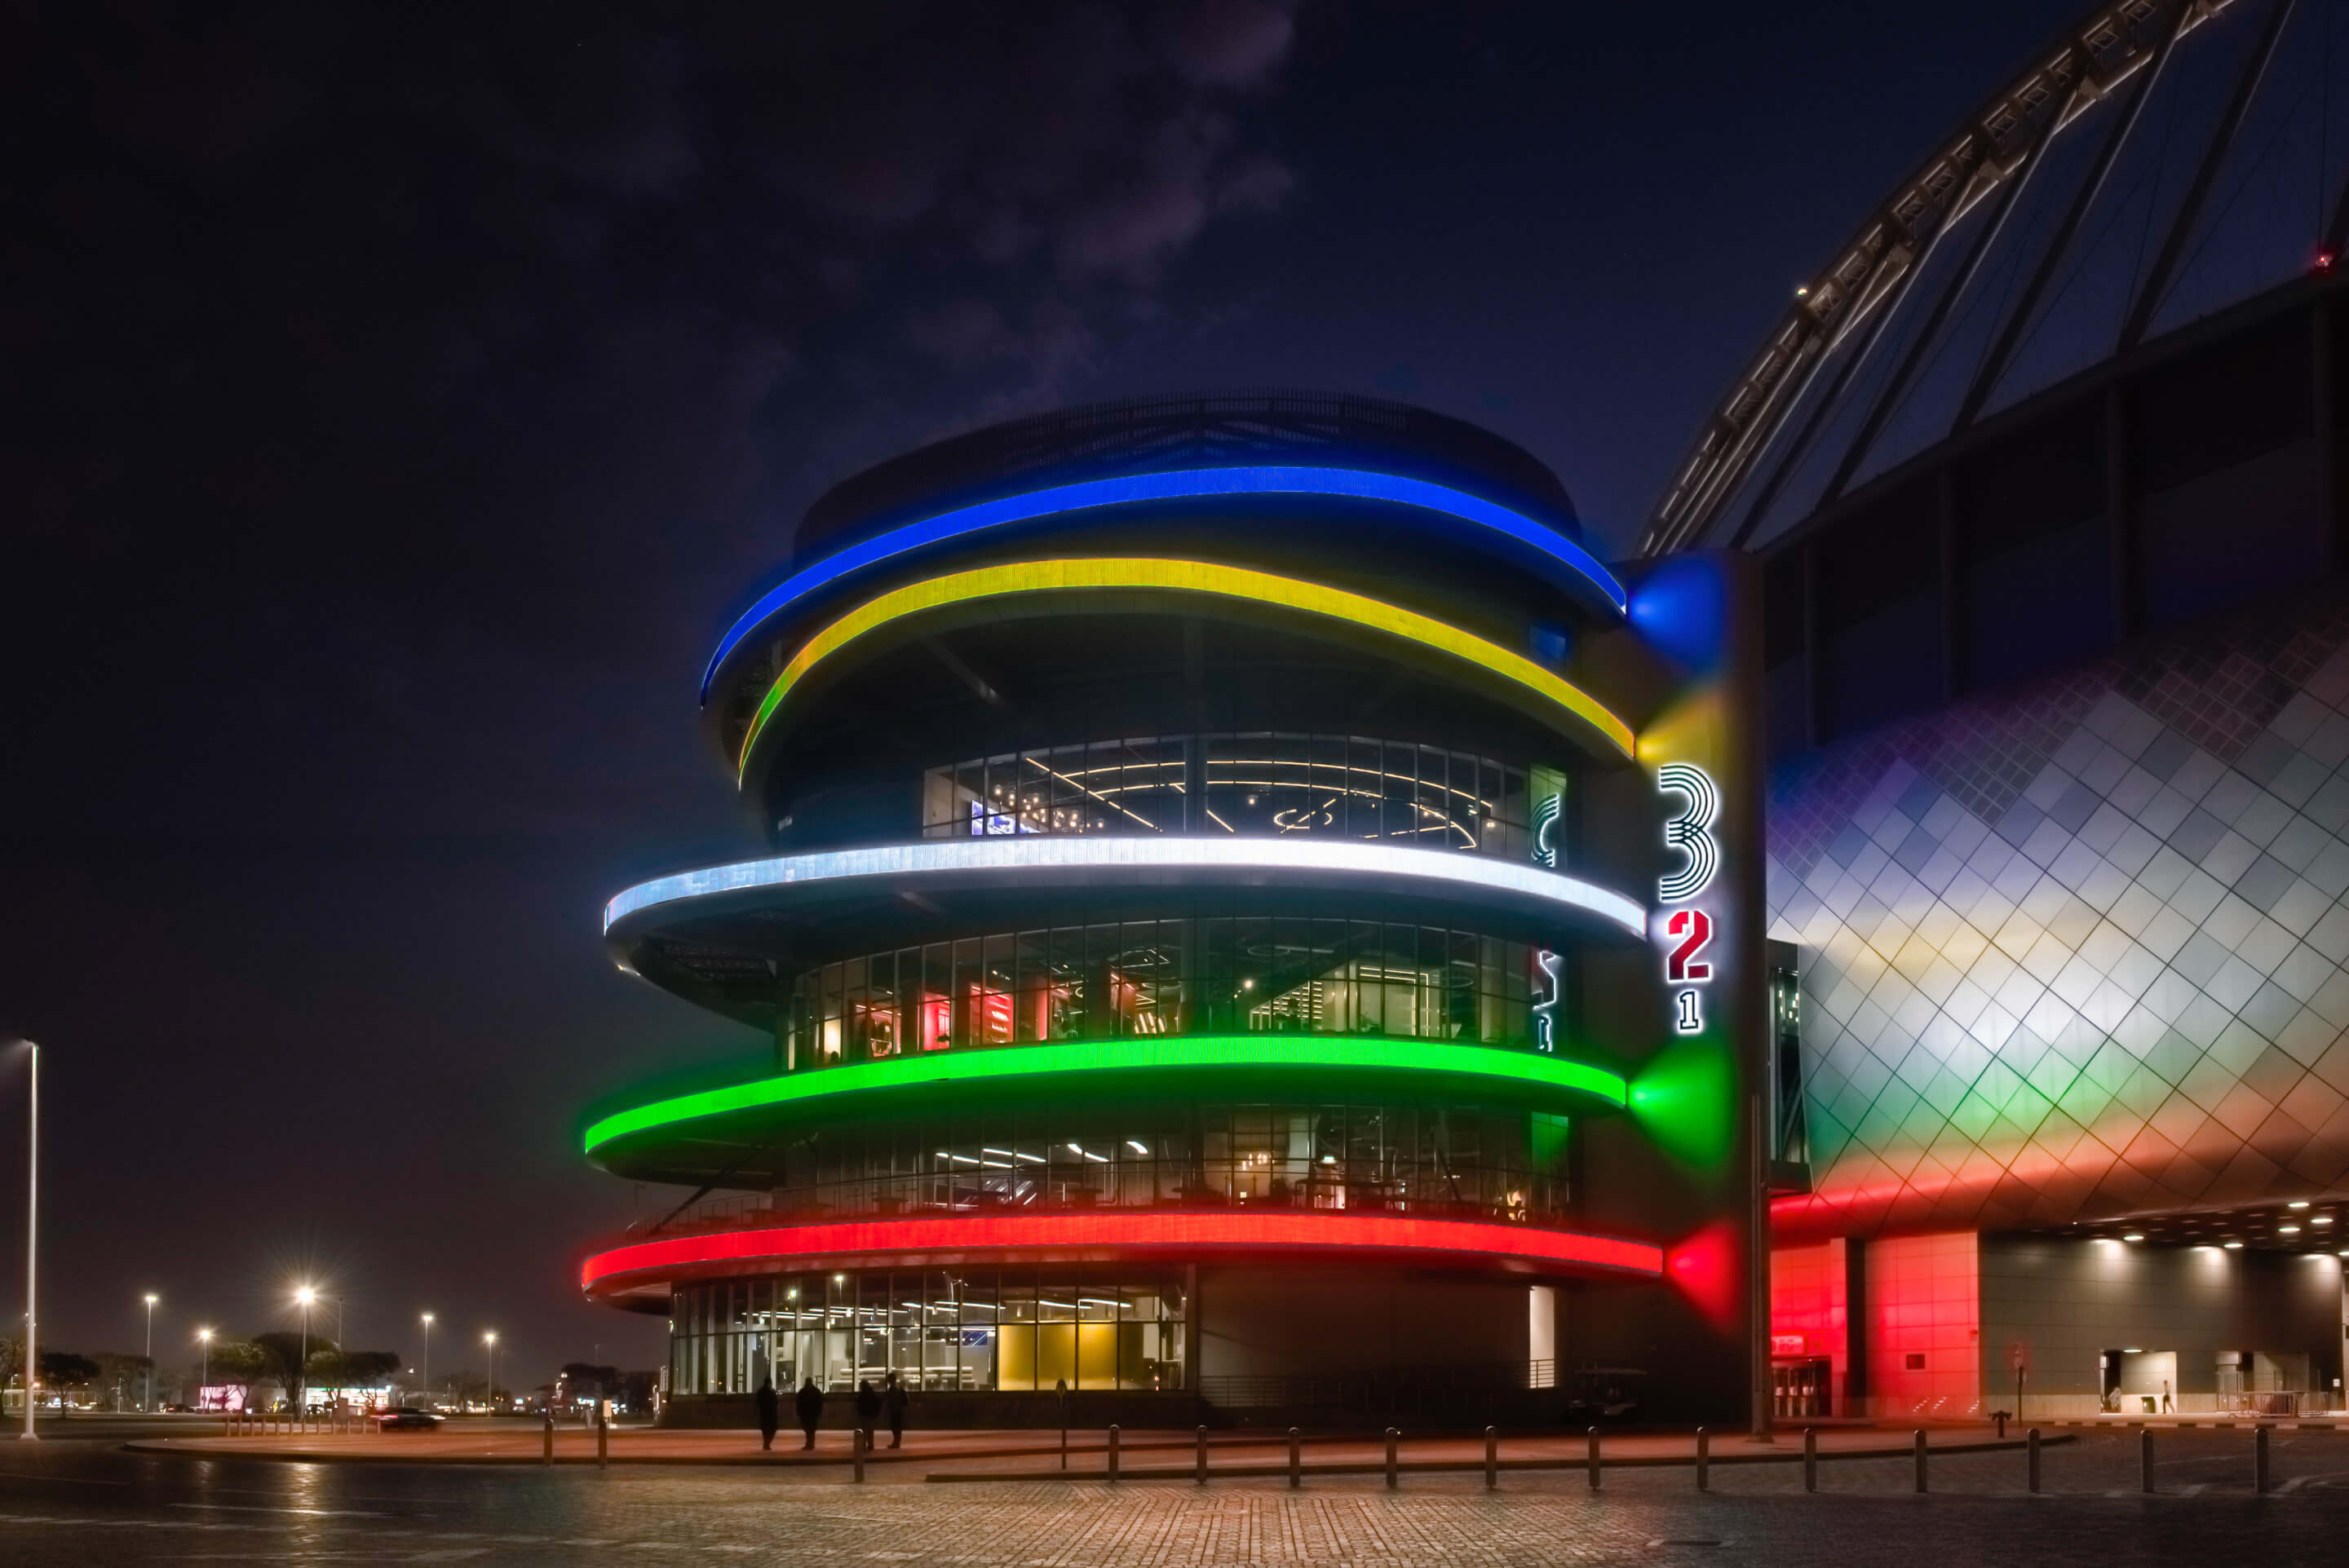 a circular building pictured at night with a facade featuing glowing, Olympic-referencing rings